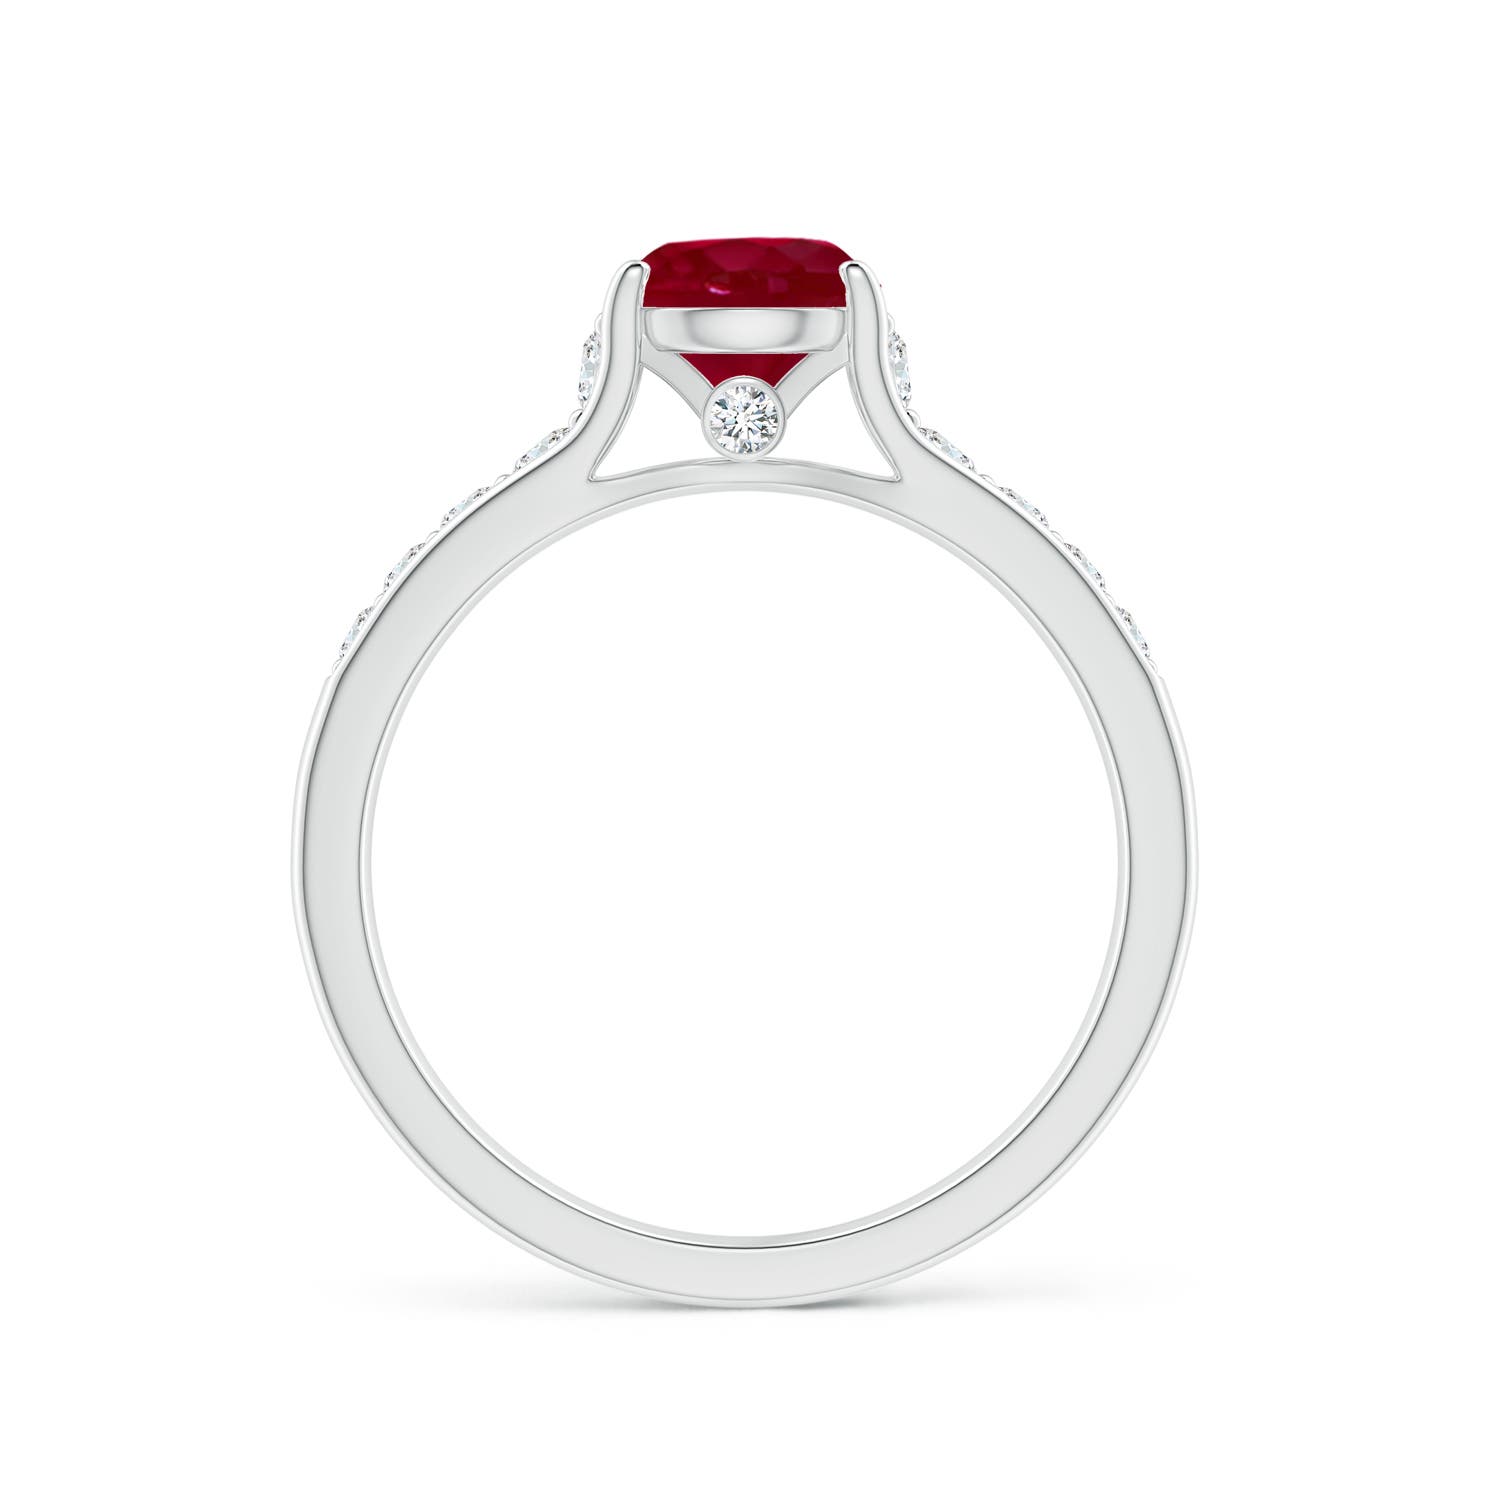 AA - Ruby / 1.38 CT / 14 KT White Gold